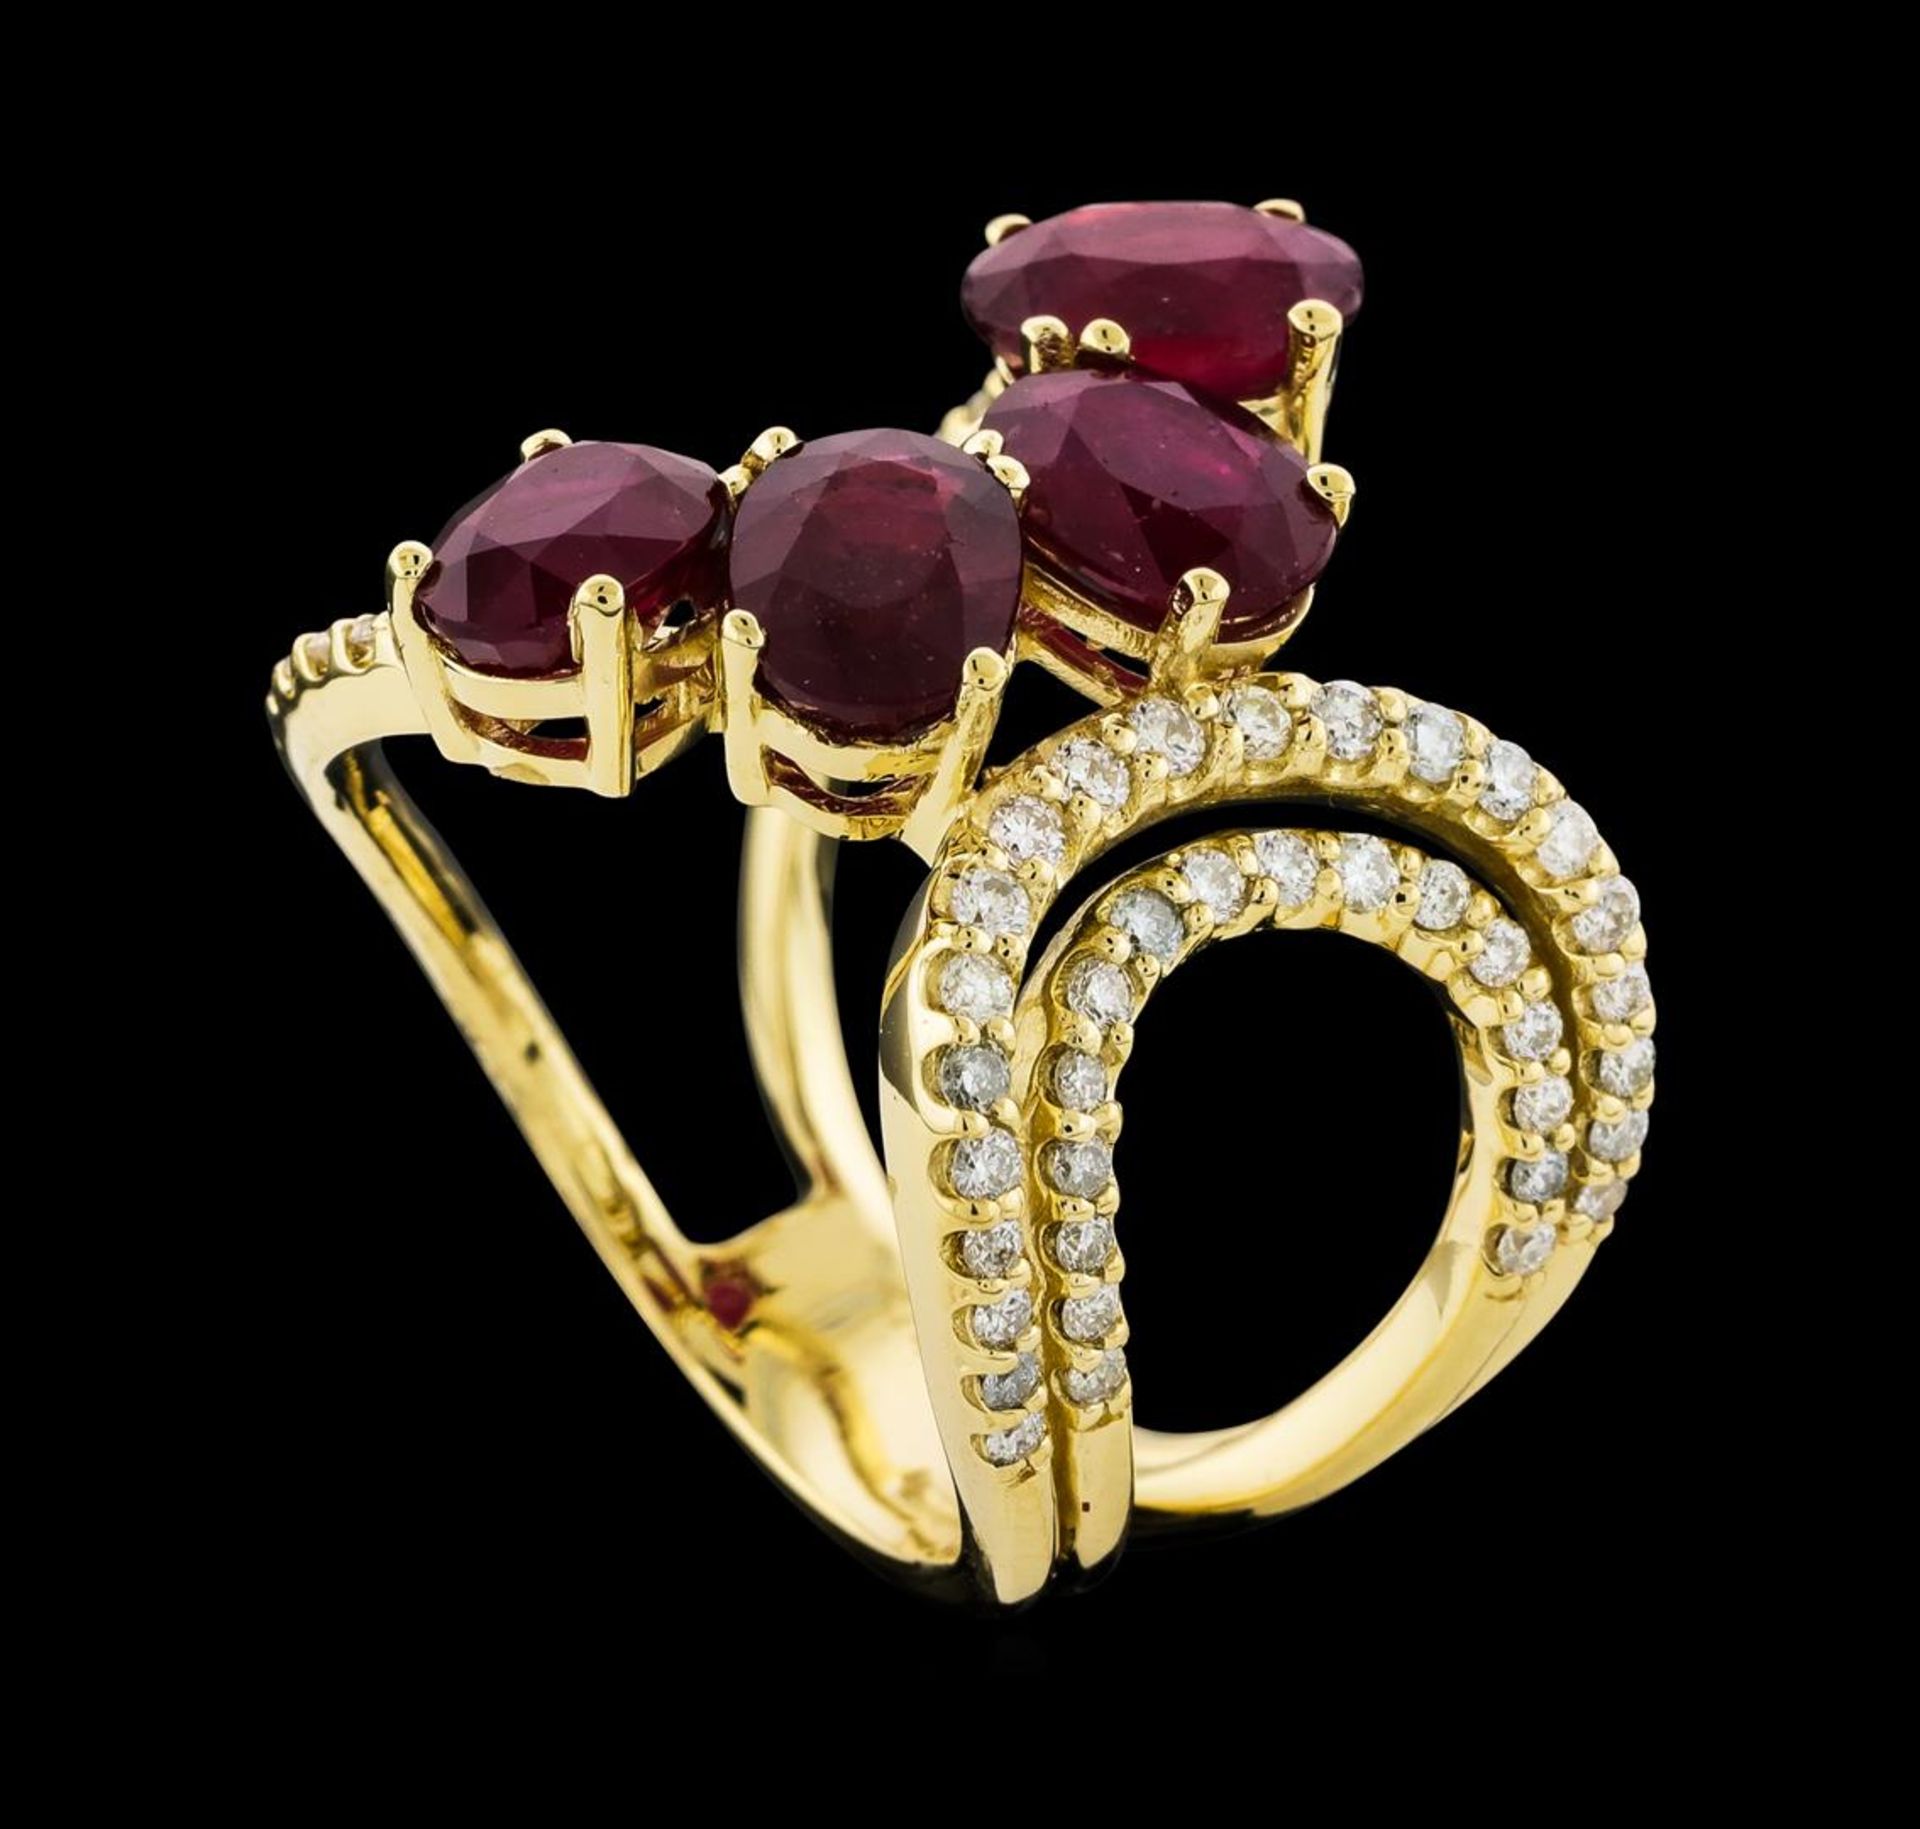 4.73 ctw Ruby and Diamond Ring - 14KT Yellow Gold - Image 4 of 4